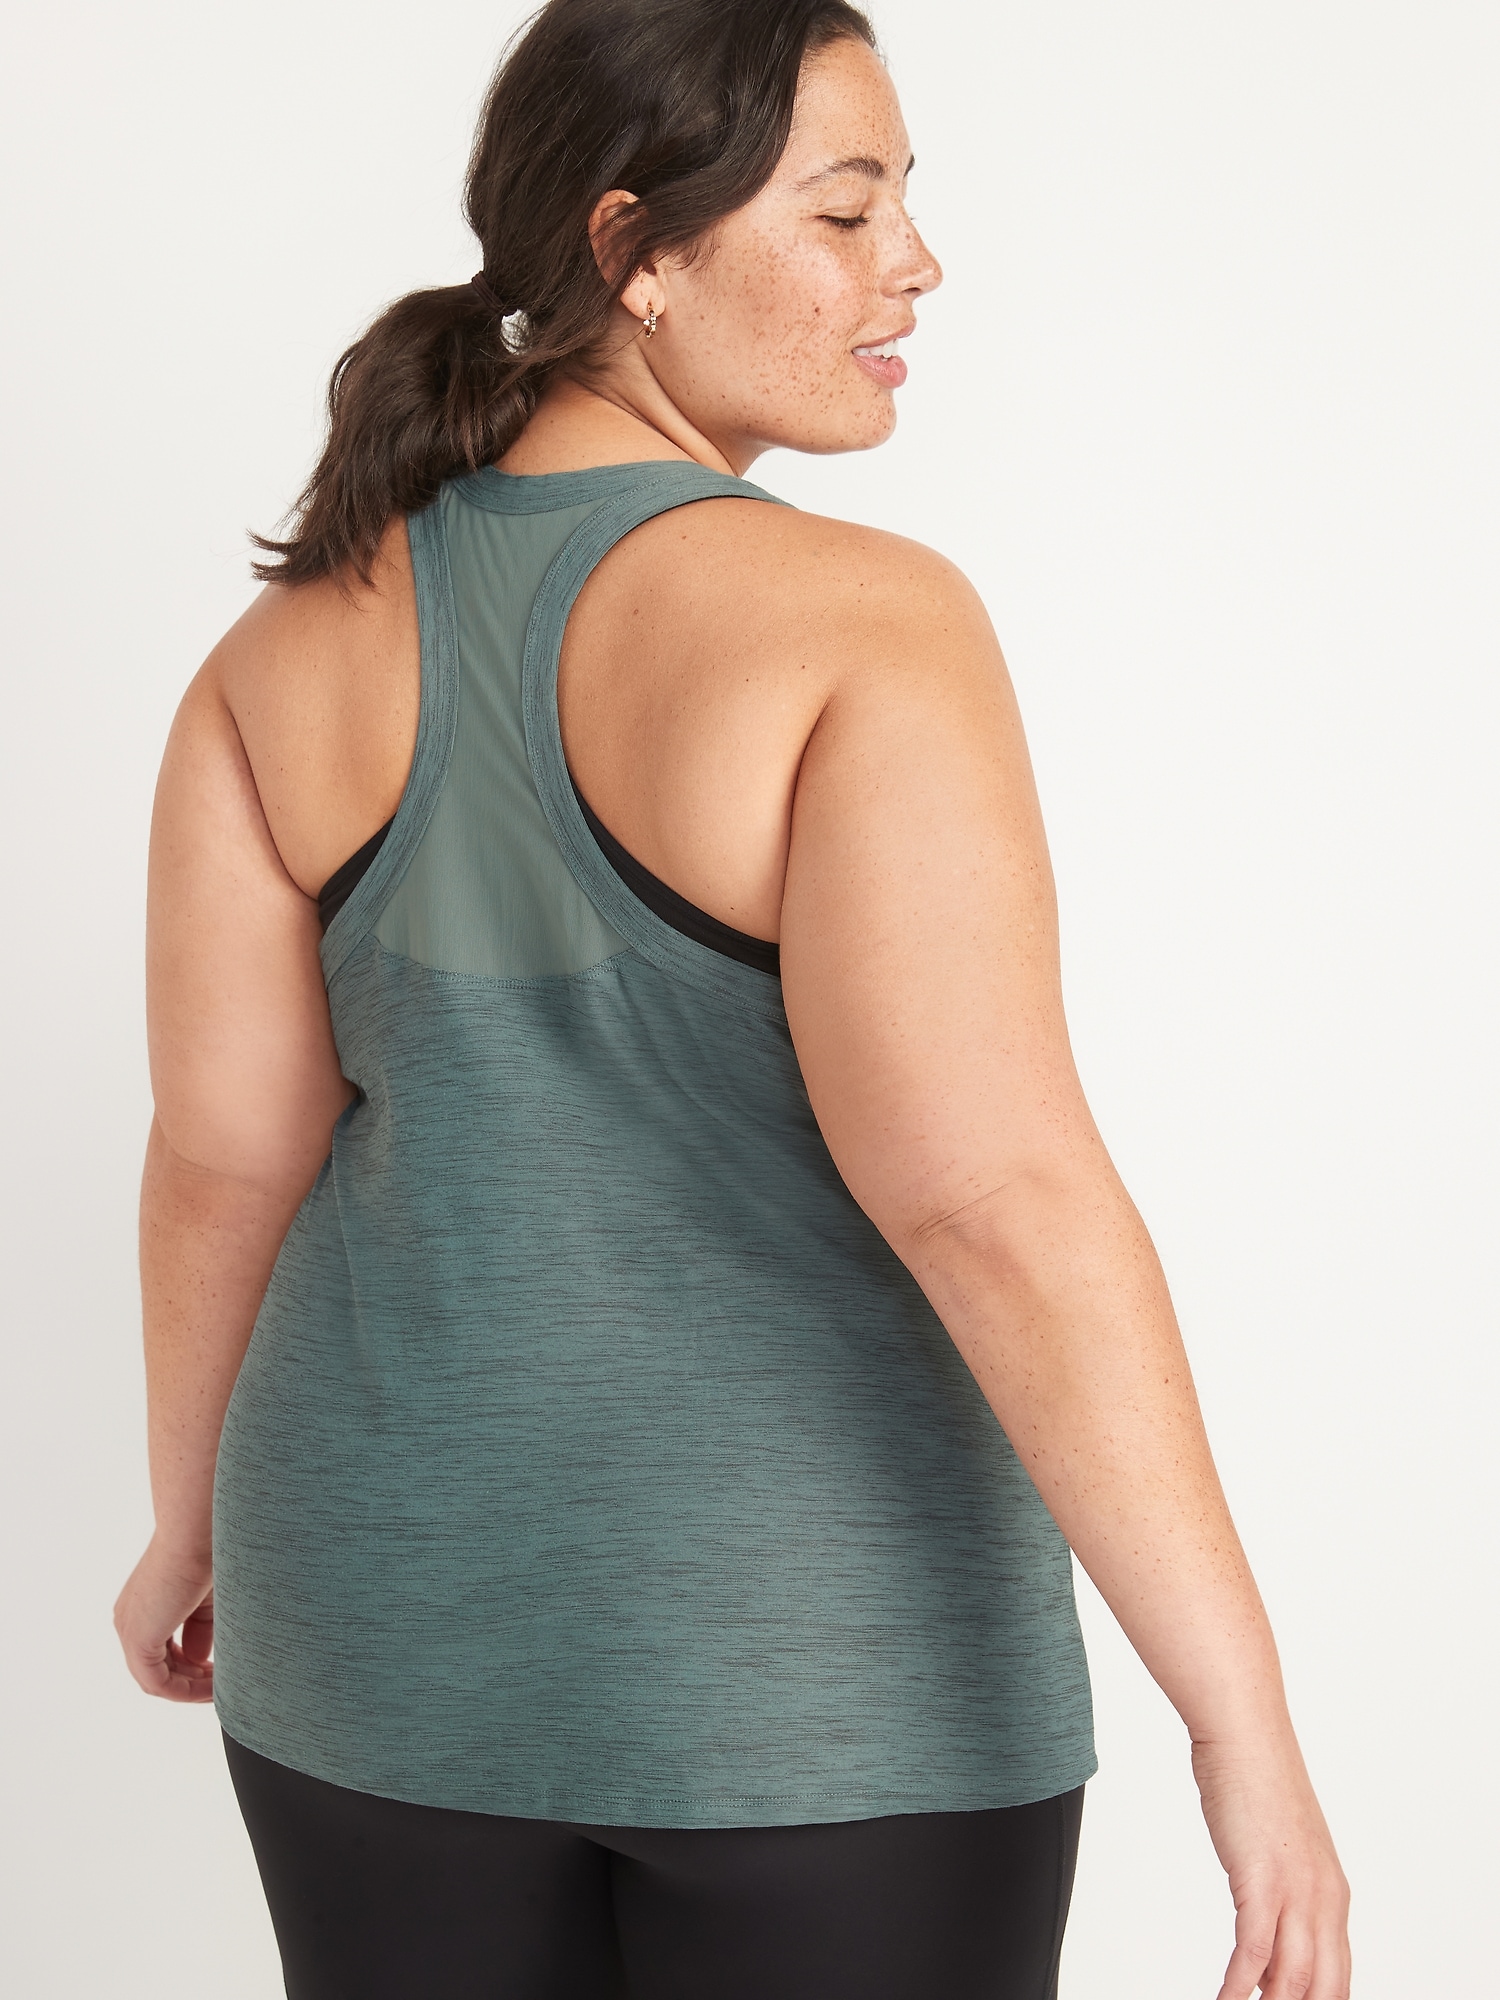 Breathe ON Racerback Tank Top 2-Pack for Women | Old Navy